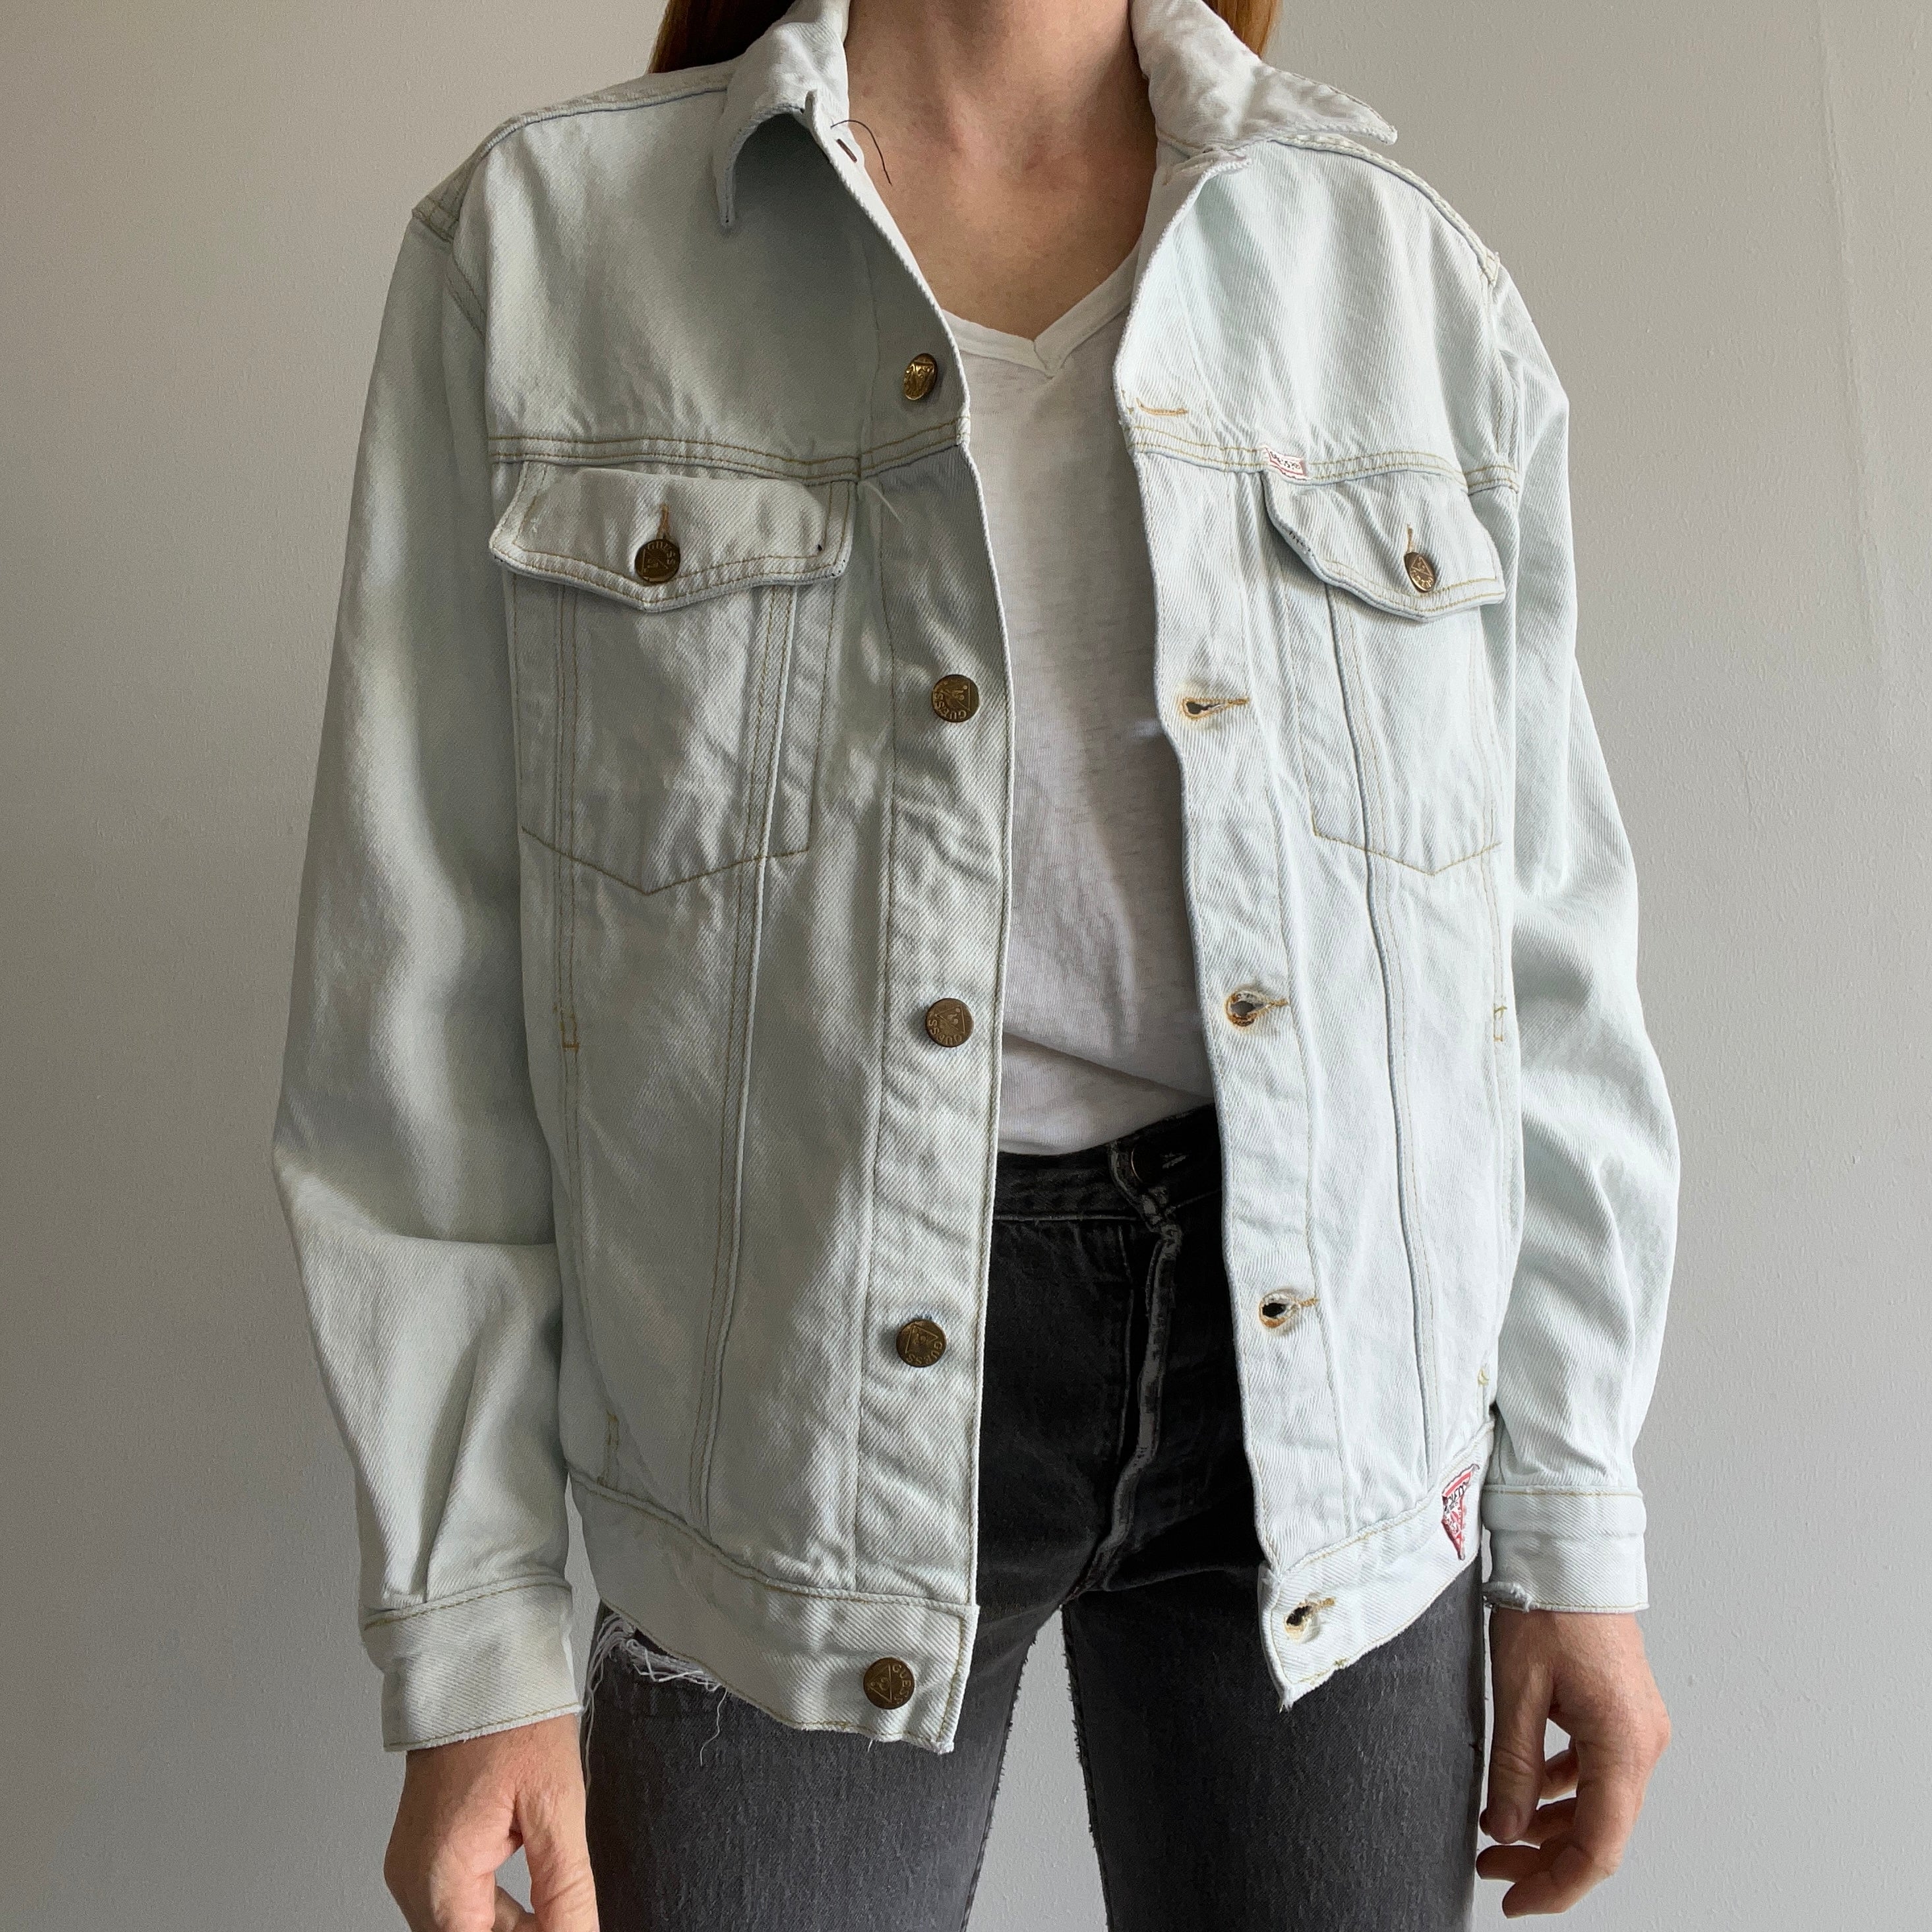 1980s GUESS! Bleached Out Soft and Worn Denim Jacket